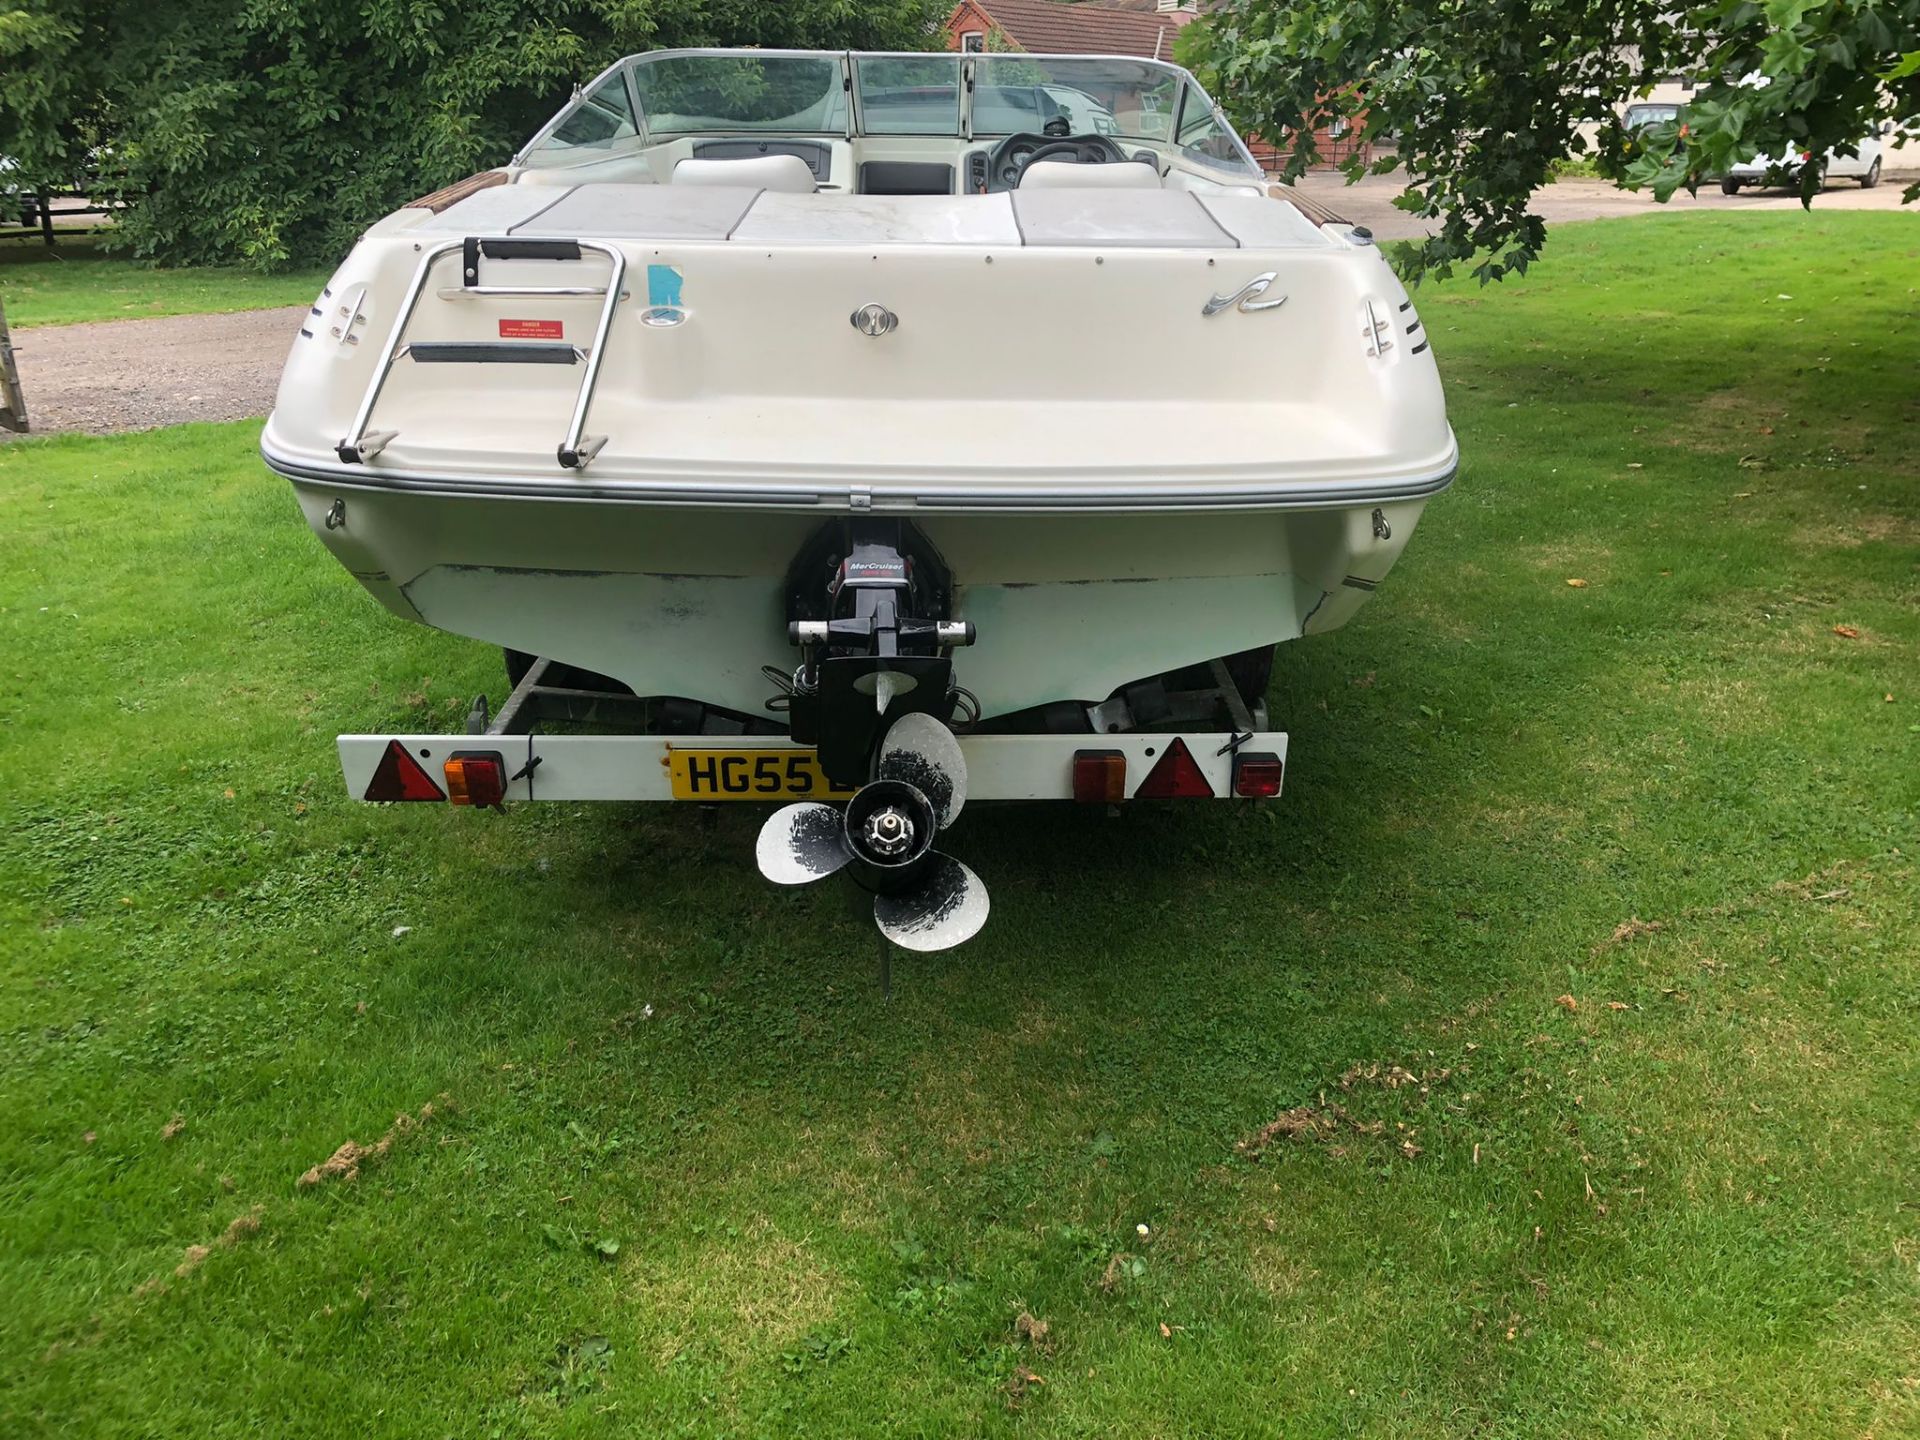 SEA RAY 170 BOAT WITH TRAILER, LICENSED FOR 6 PEOPLE, BRAND NEW TYRES *NO VAT* - Image 5 of 16